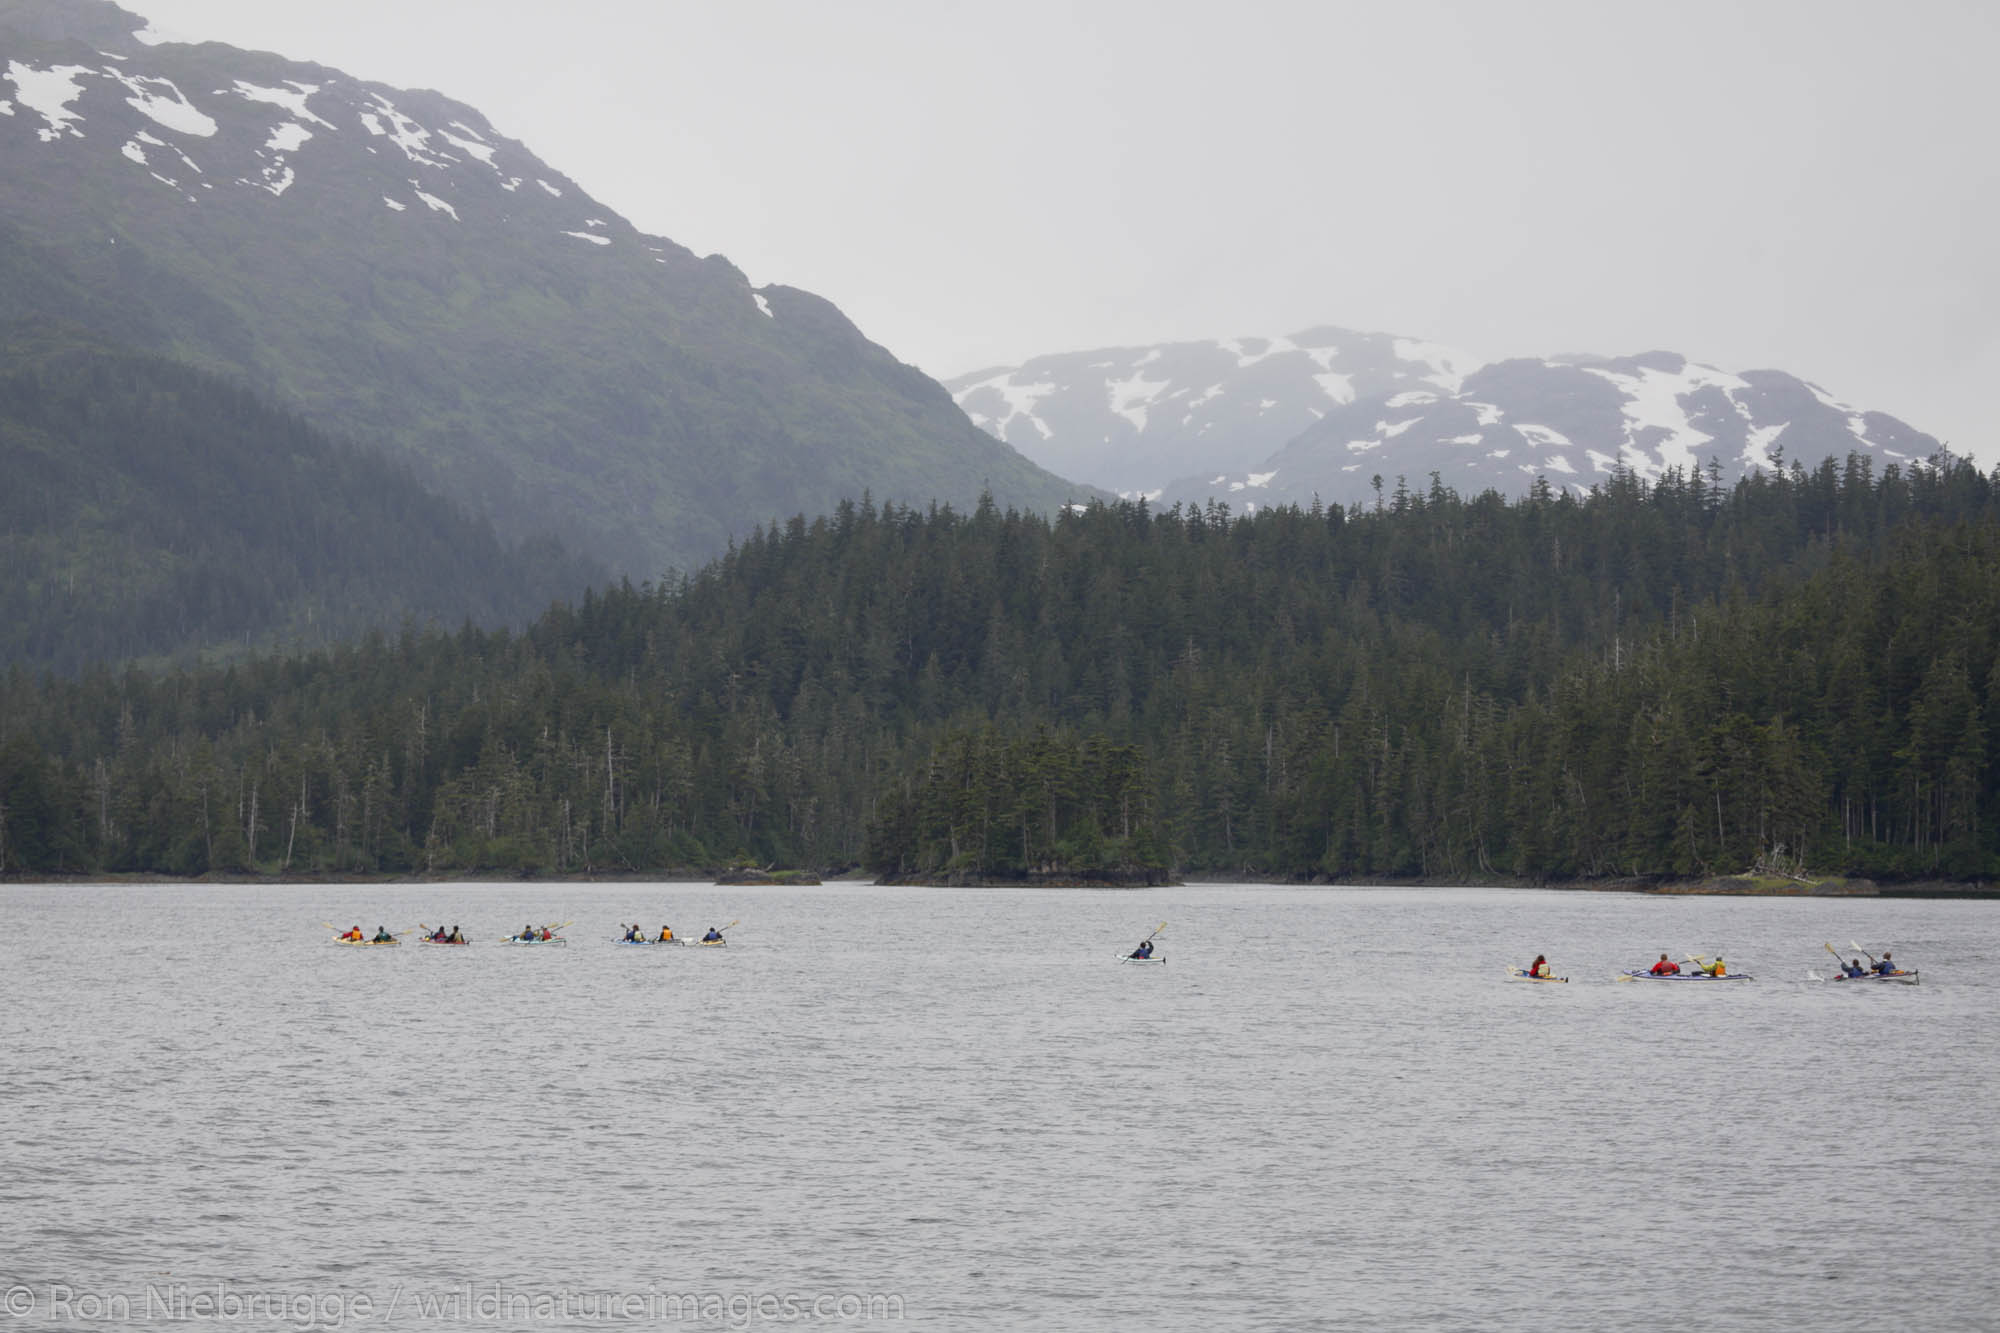 Group of Kayakers in Culross Passage, Prince William Sound, Chugach National Forest, Alaska.